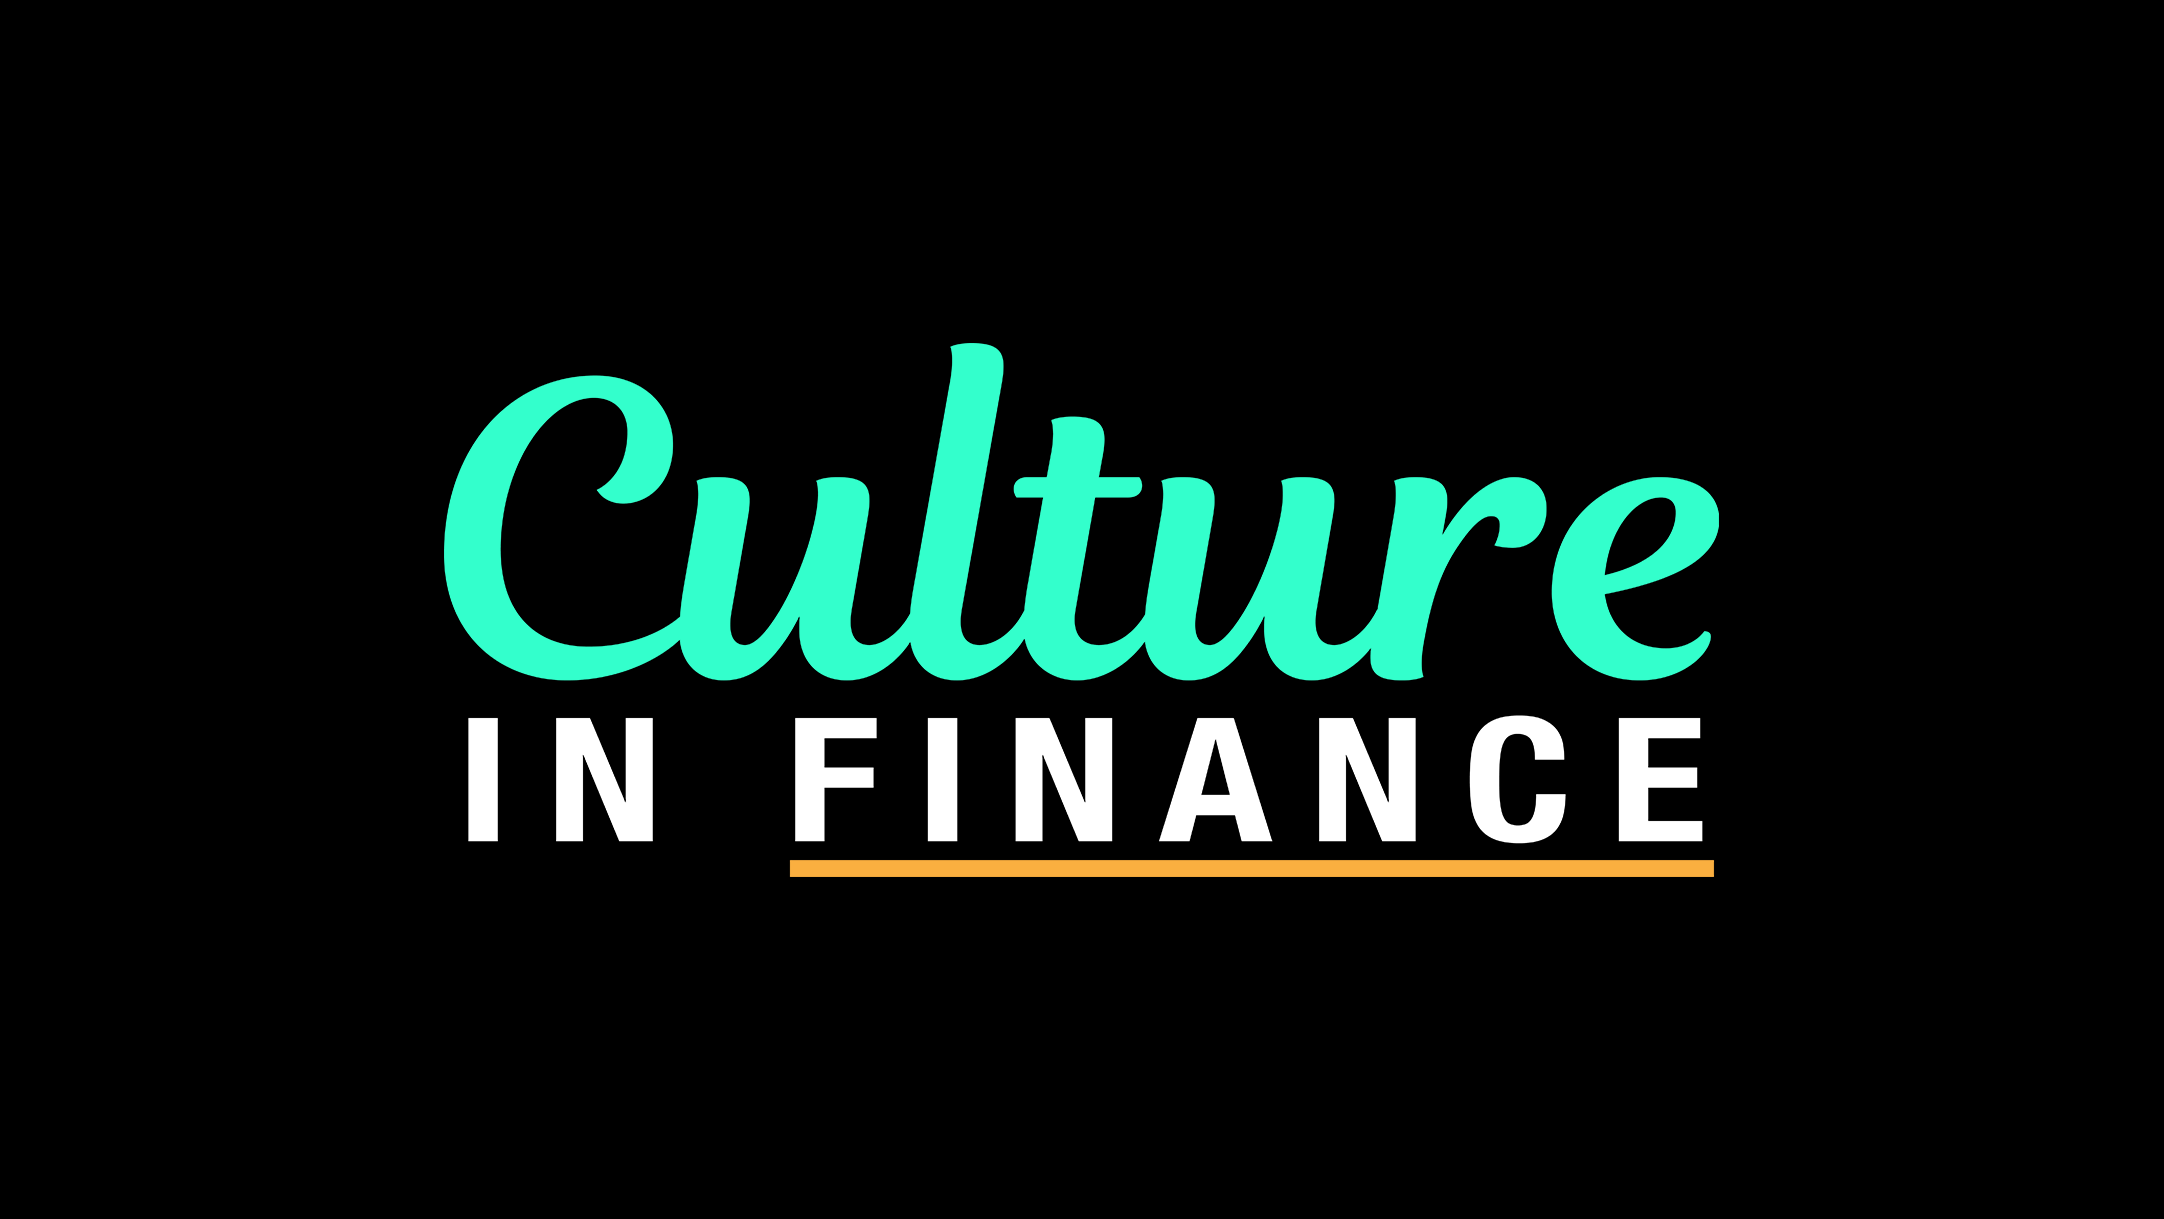 Introducing Culture in Finance